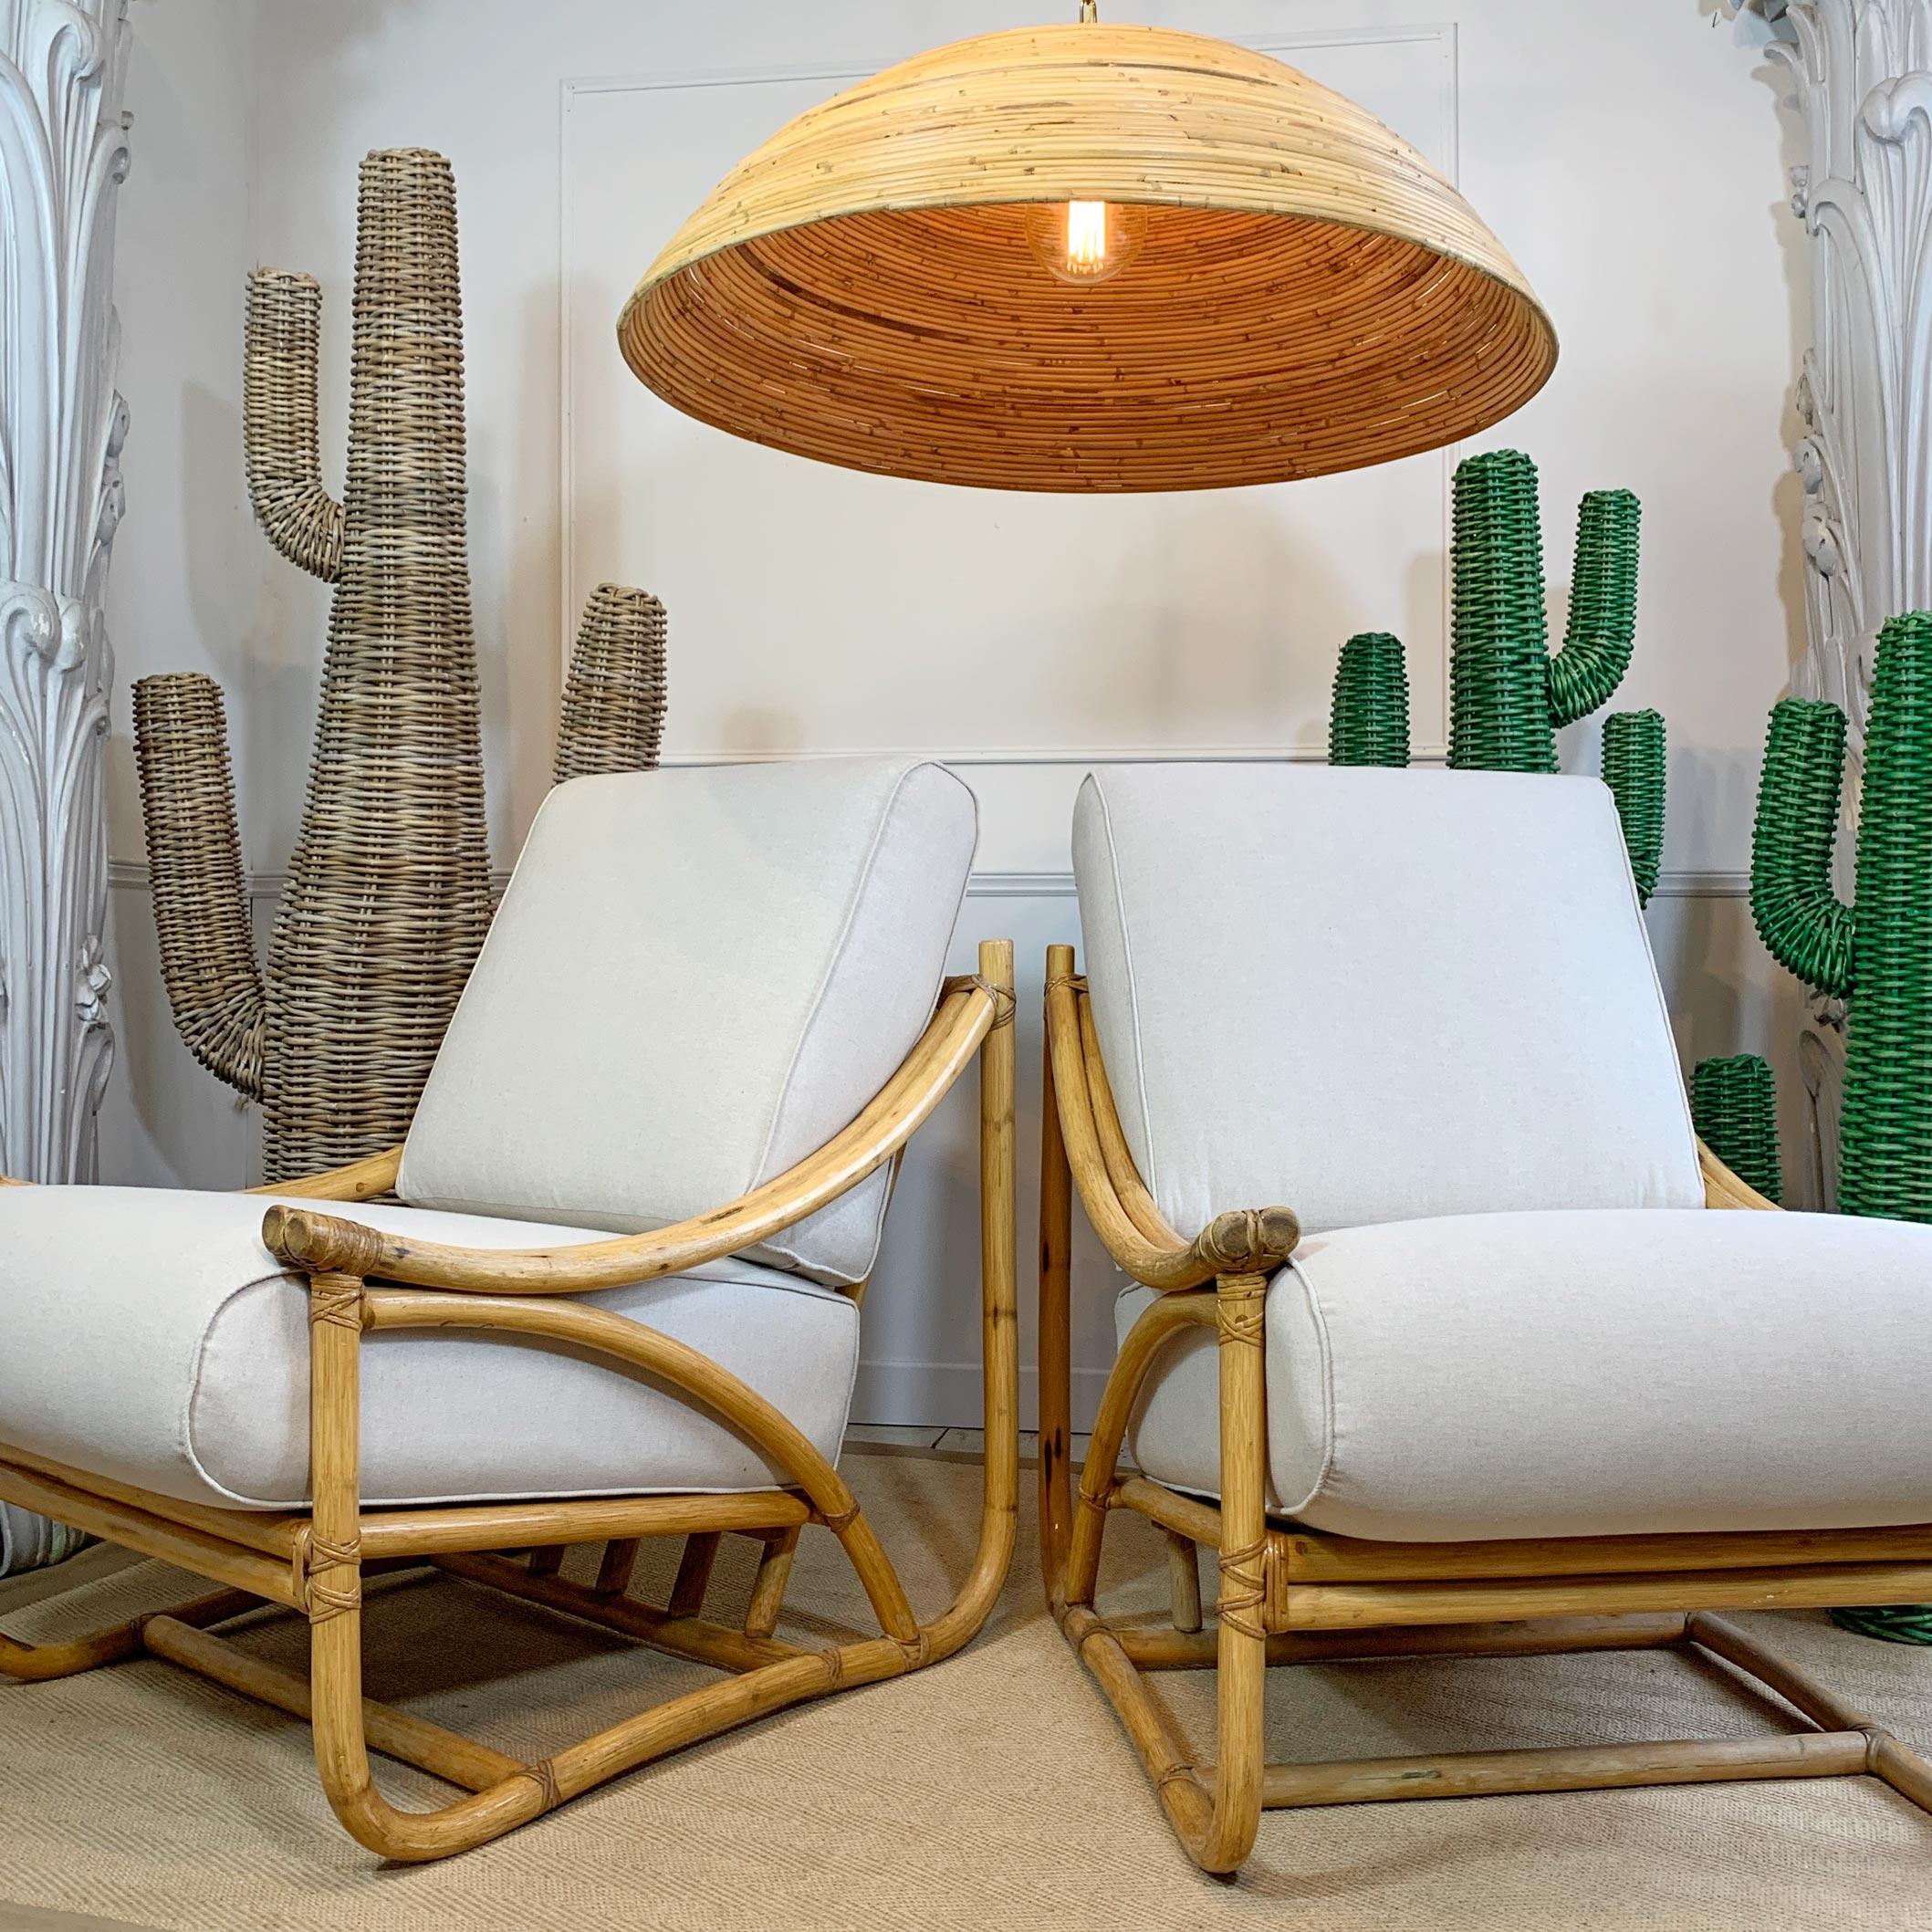 Superb pair of 1950s rattan lounge chairs by Angraves of Leicester, from their Invincible collection, each chair with the Angraves identification plaque. The seat cushions have been fully professionally reupholstered in oatmeal linen fabric.

In